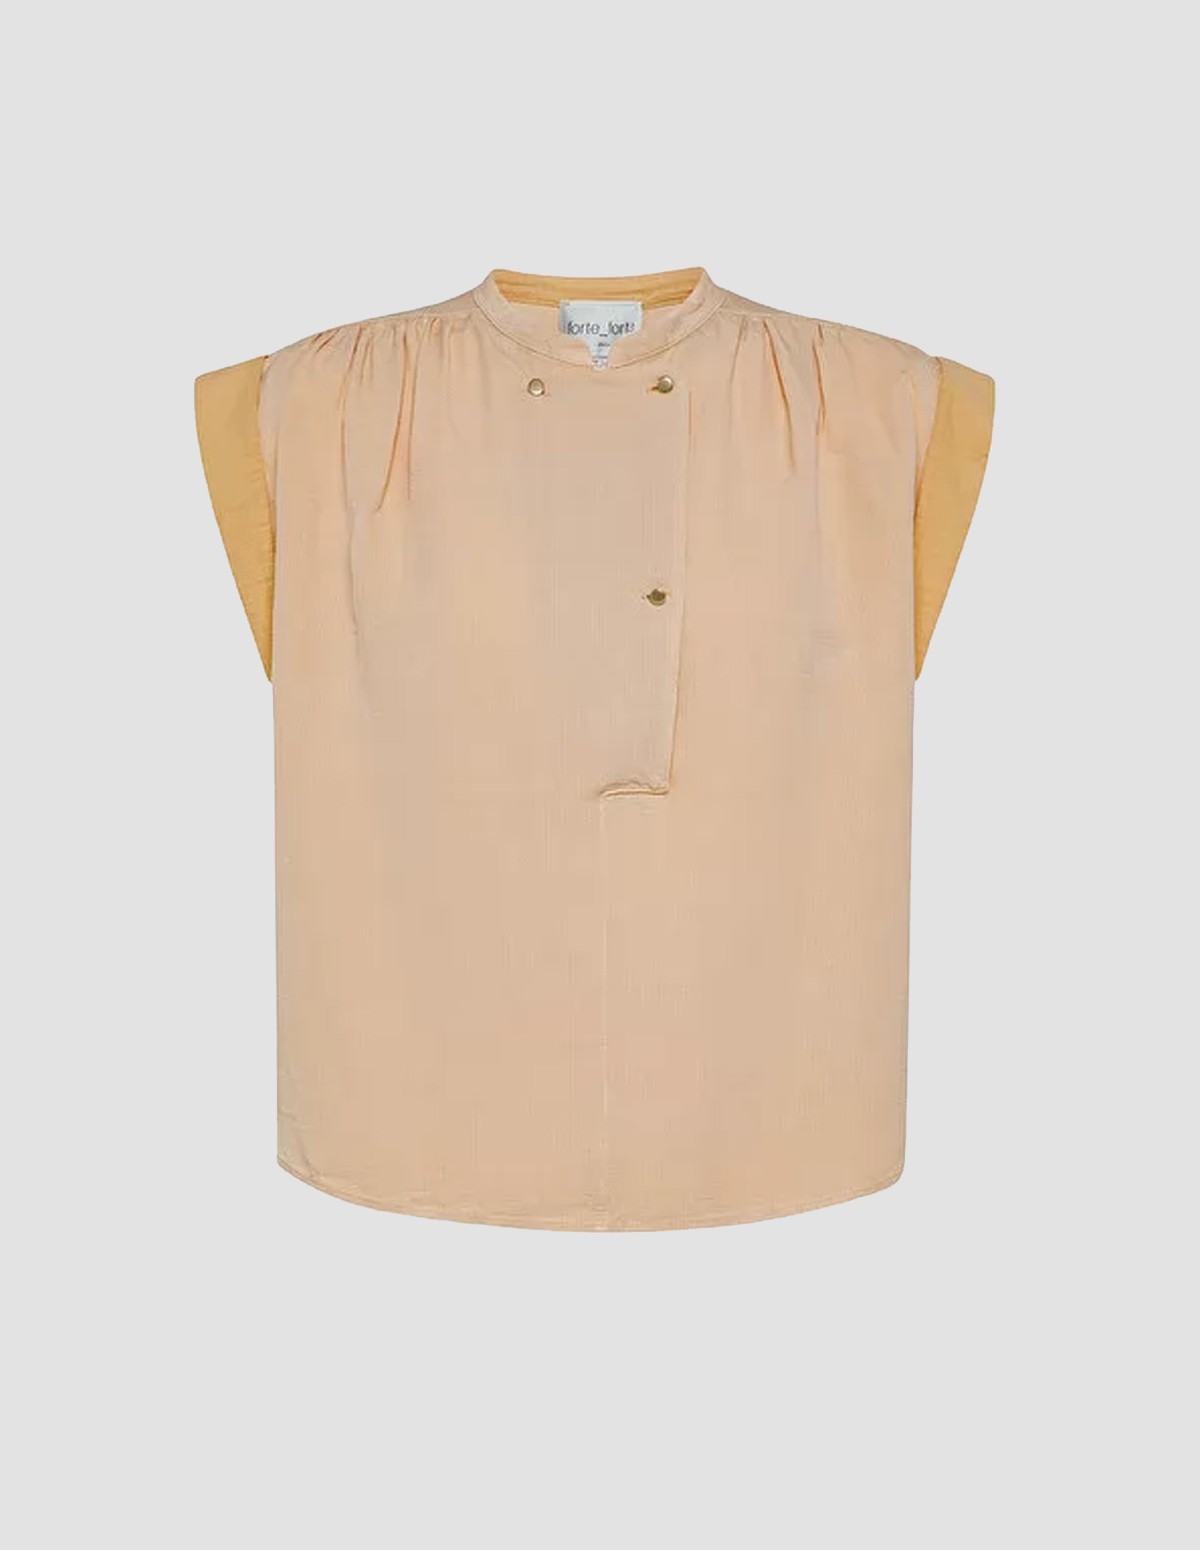 Forte 8848 Top - APRICOT